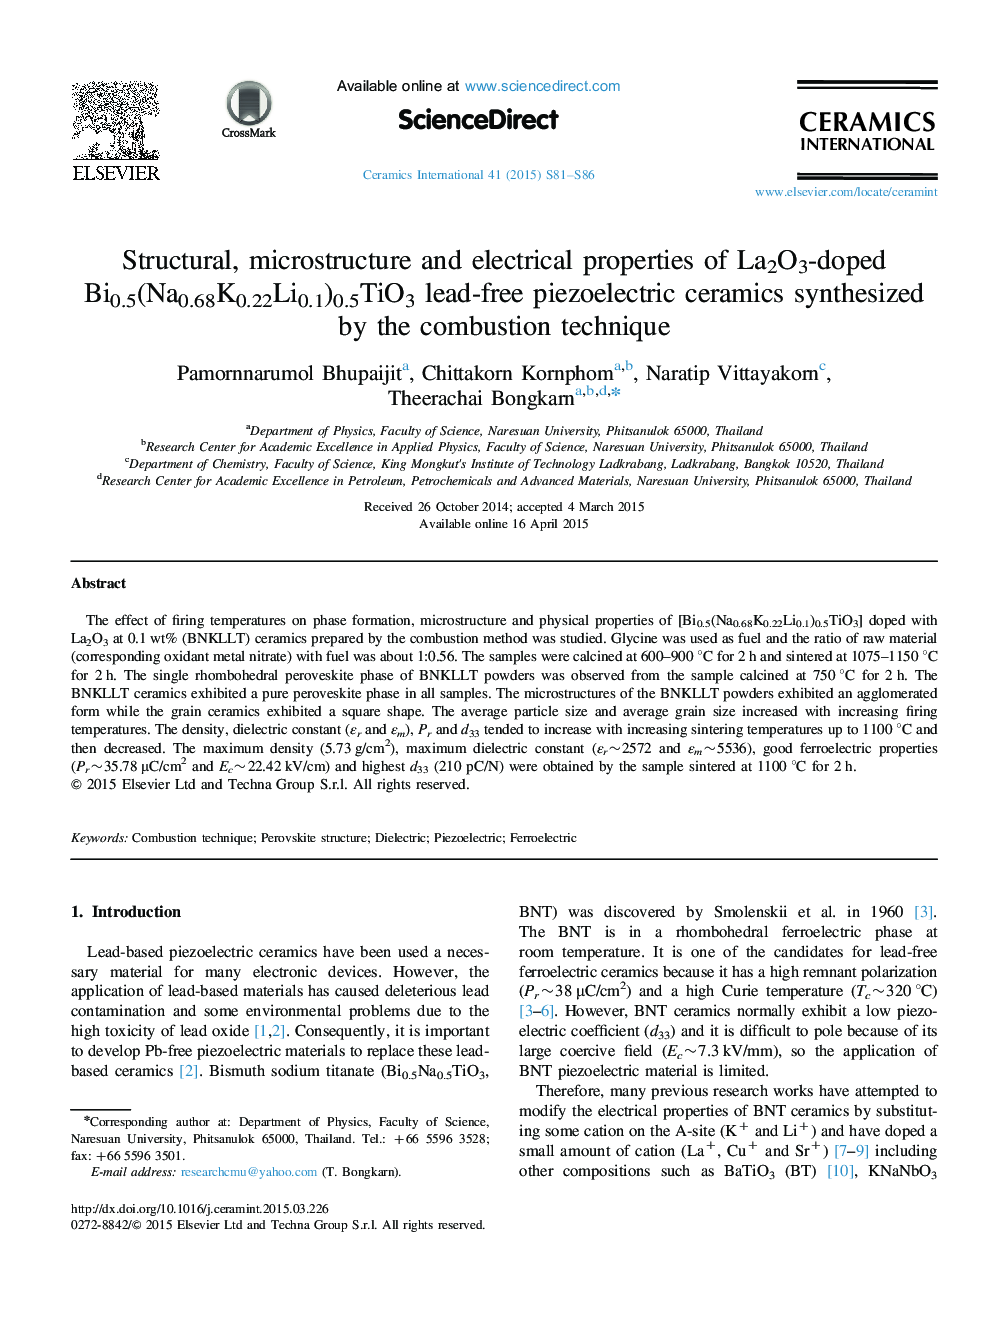 Structural, microstructure and electrical properties of La2O3-doped Bi0.5(Na0.68K0.22Li0.1)0.5TiO3 lead-free piezoelectric ceramics synthesized by the combustion technique